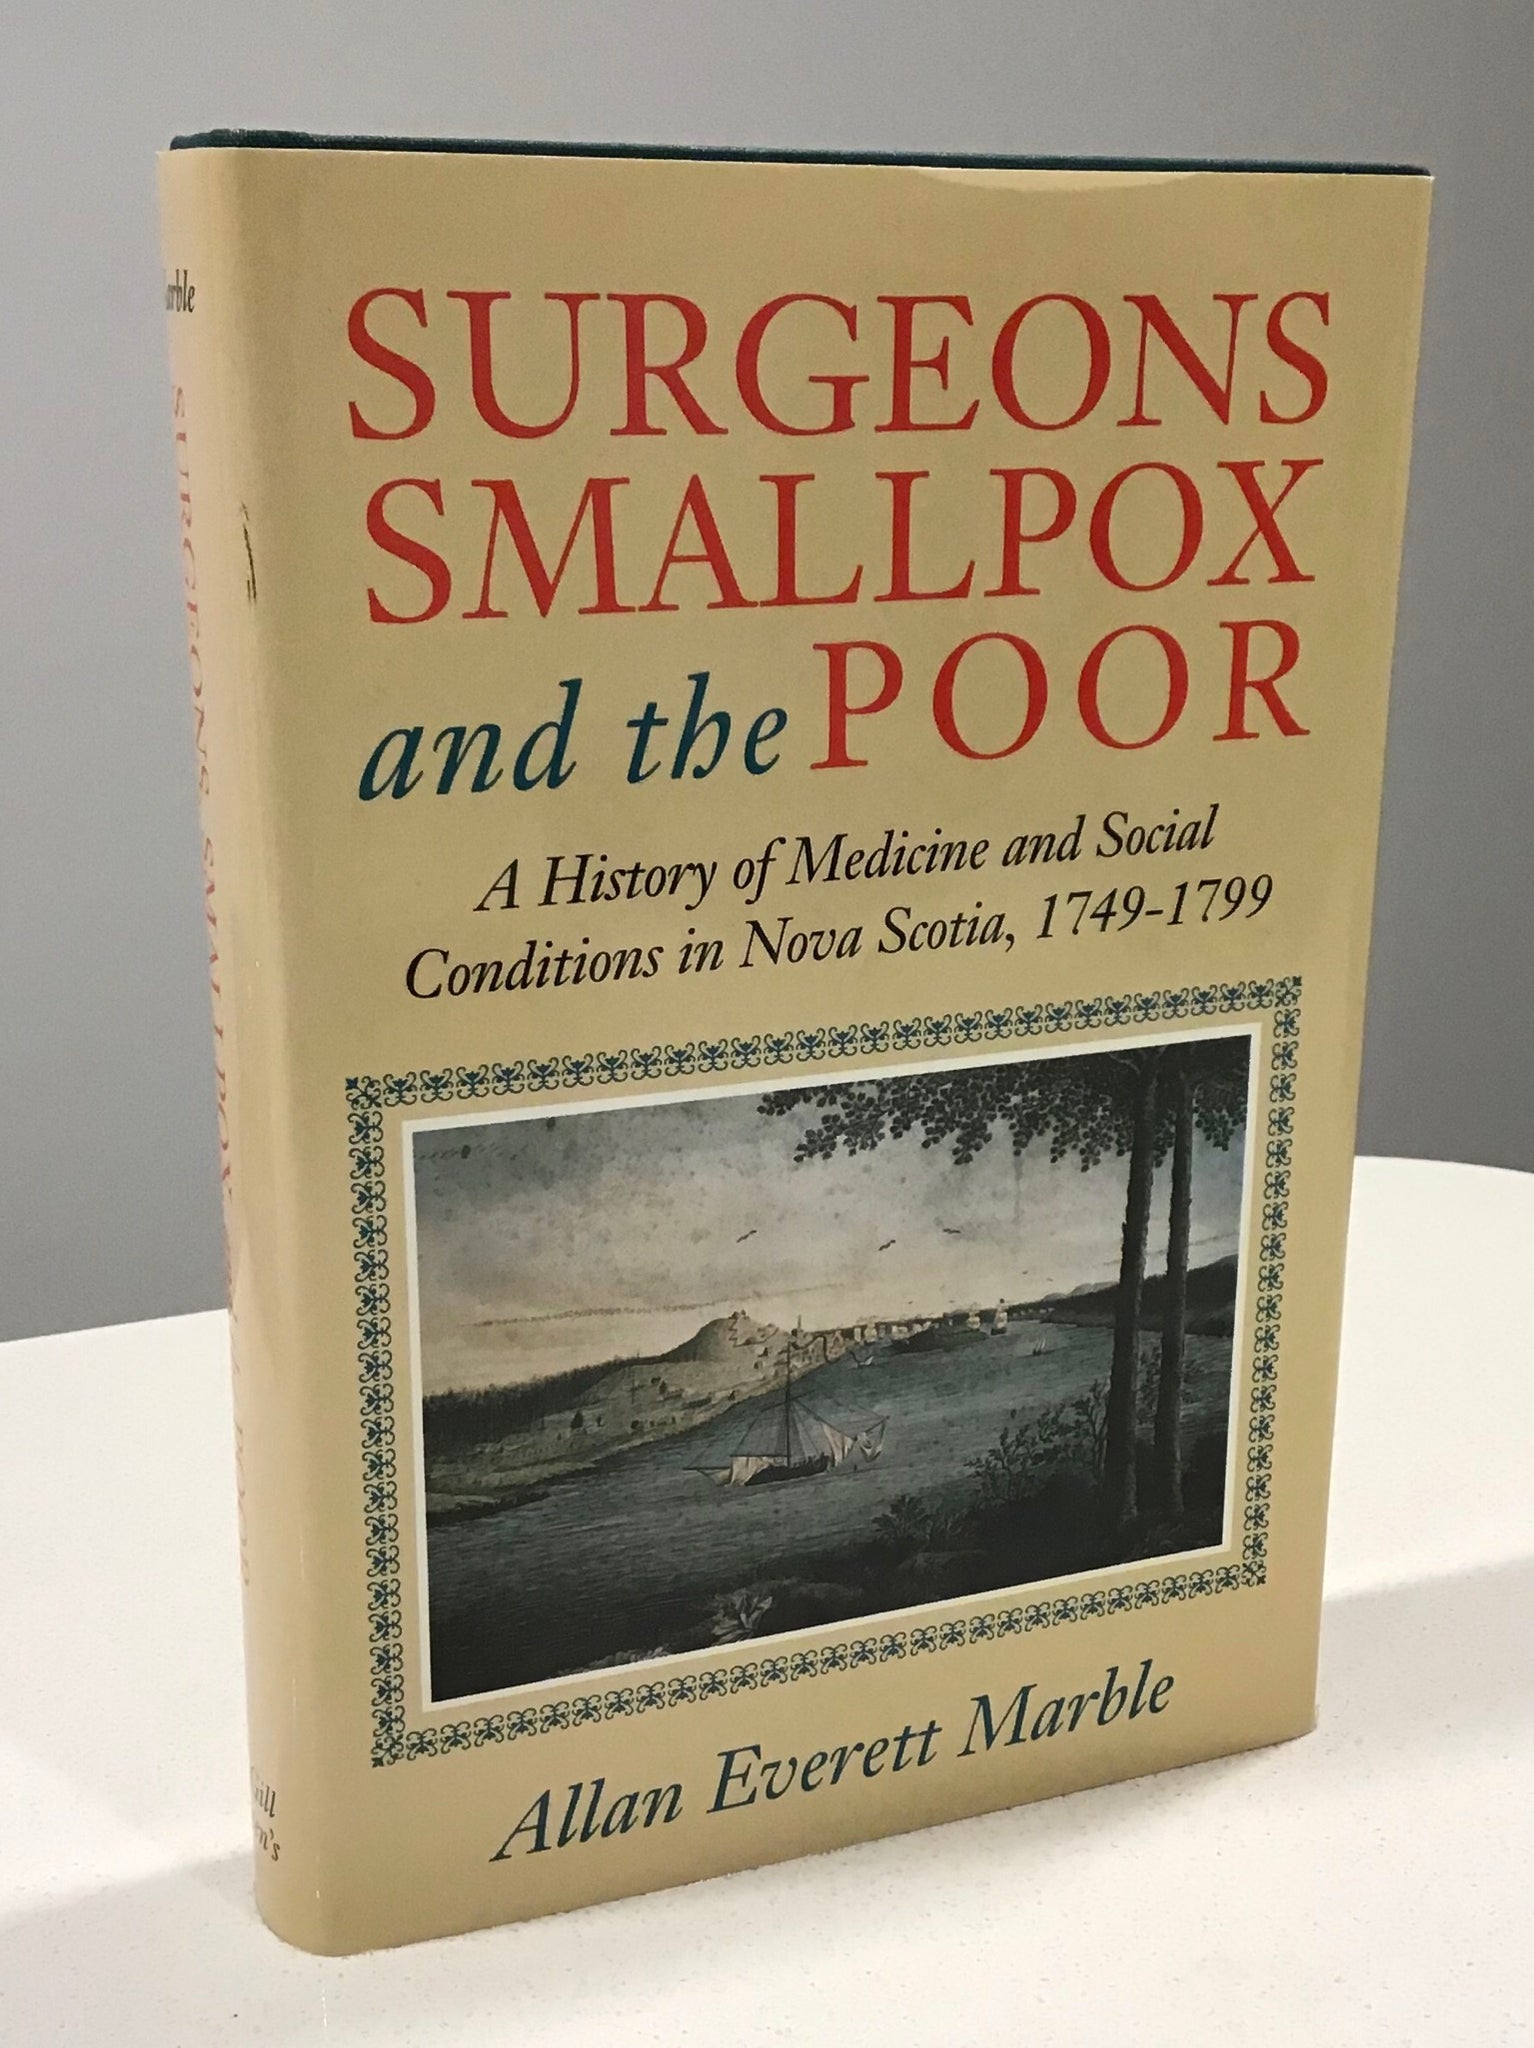 Surgeons, Smallpox, and the Poor; A History of Medicine and Social Conditions in Nova Scotia, 1749-1799